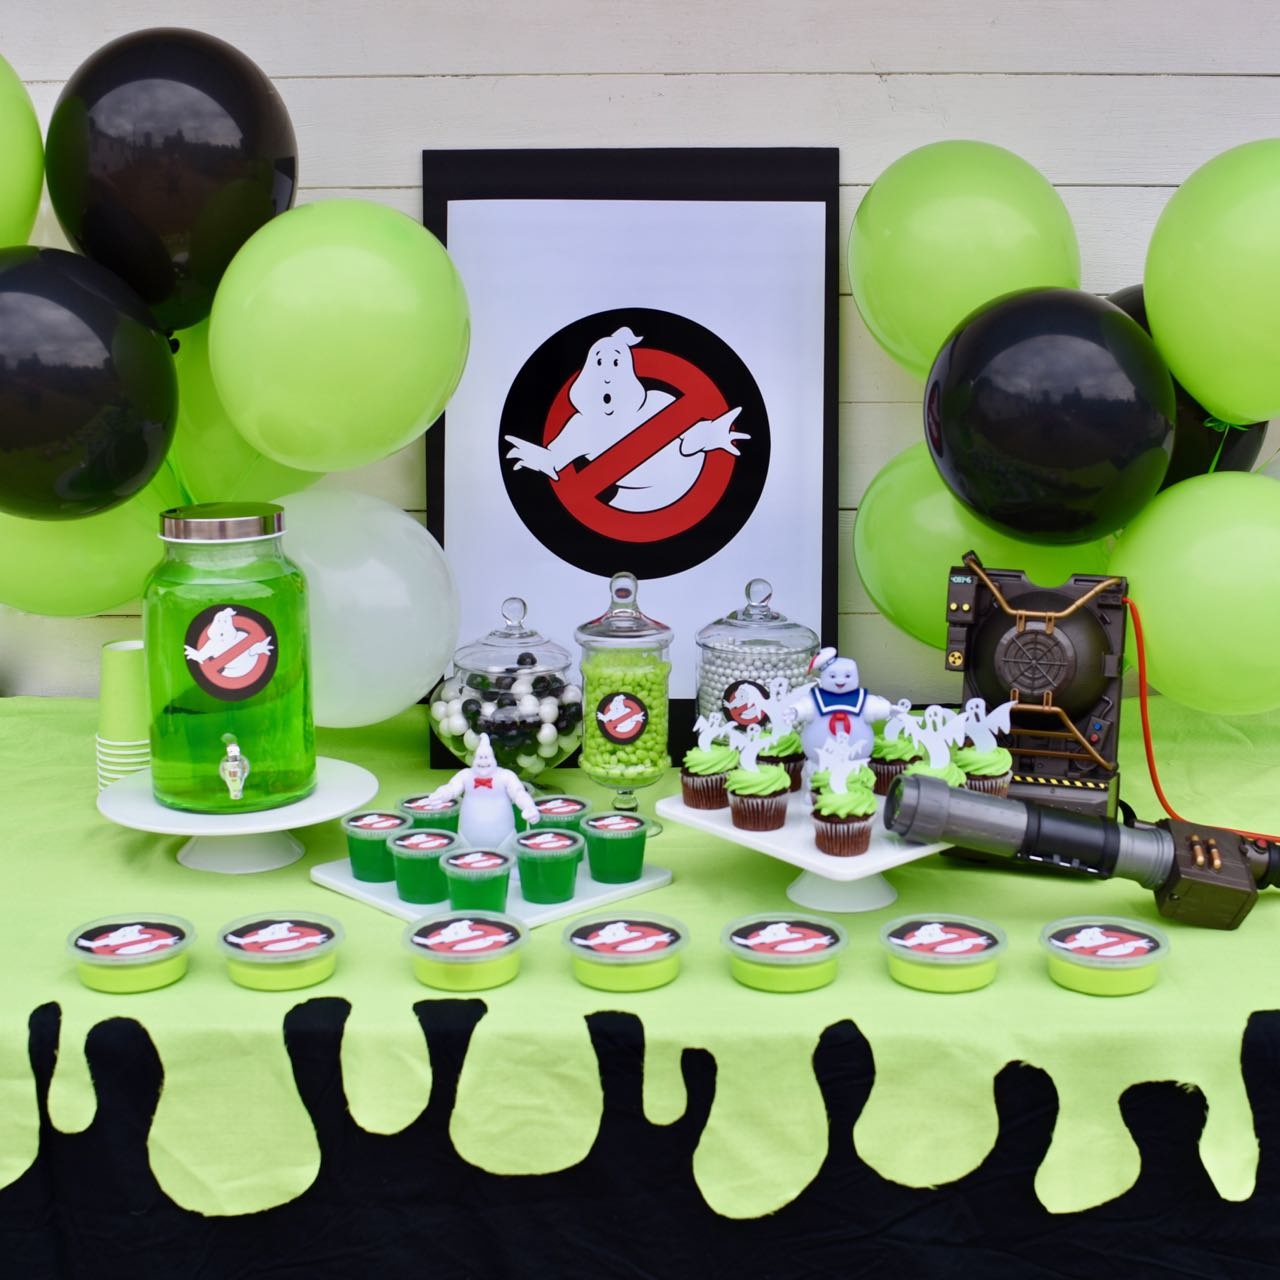 Ghostbusters Party Ideas For The Ultimate Ghostbusters Party - Ghostbusters Free Printables